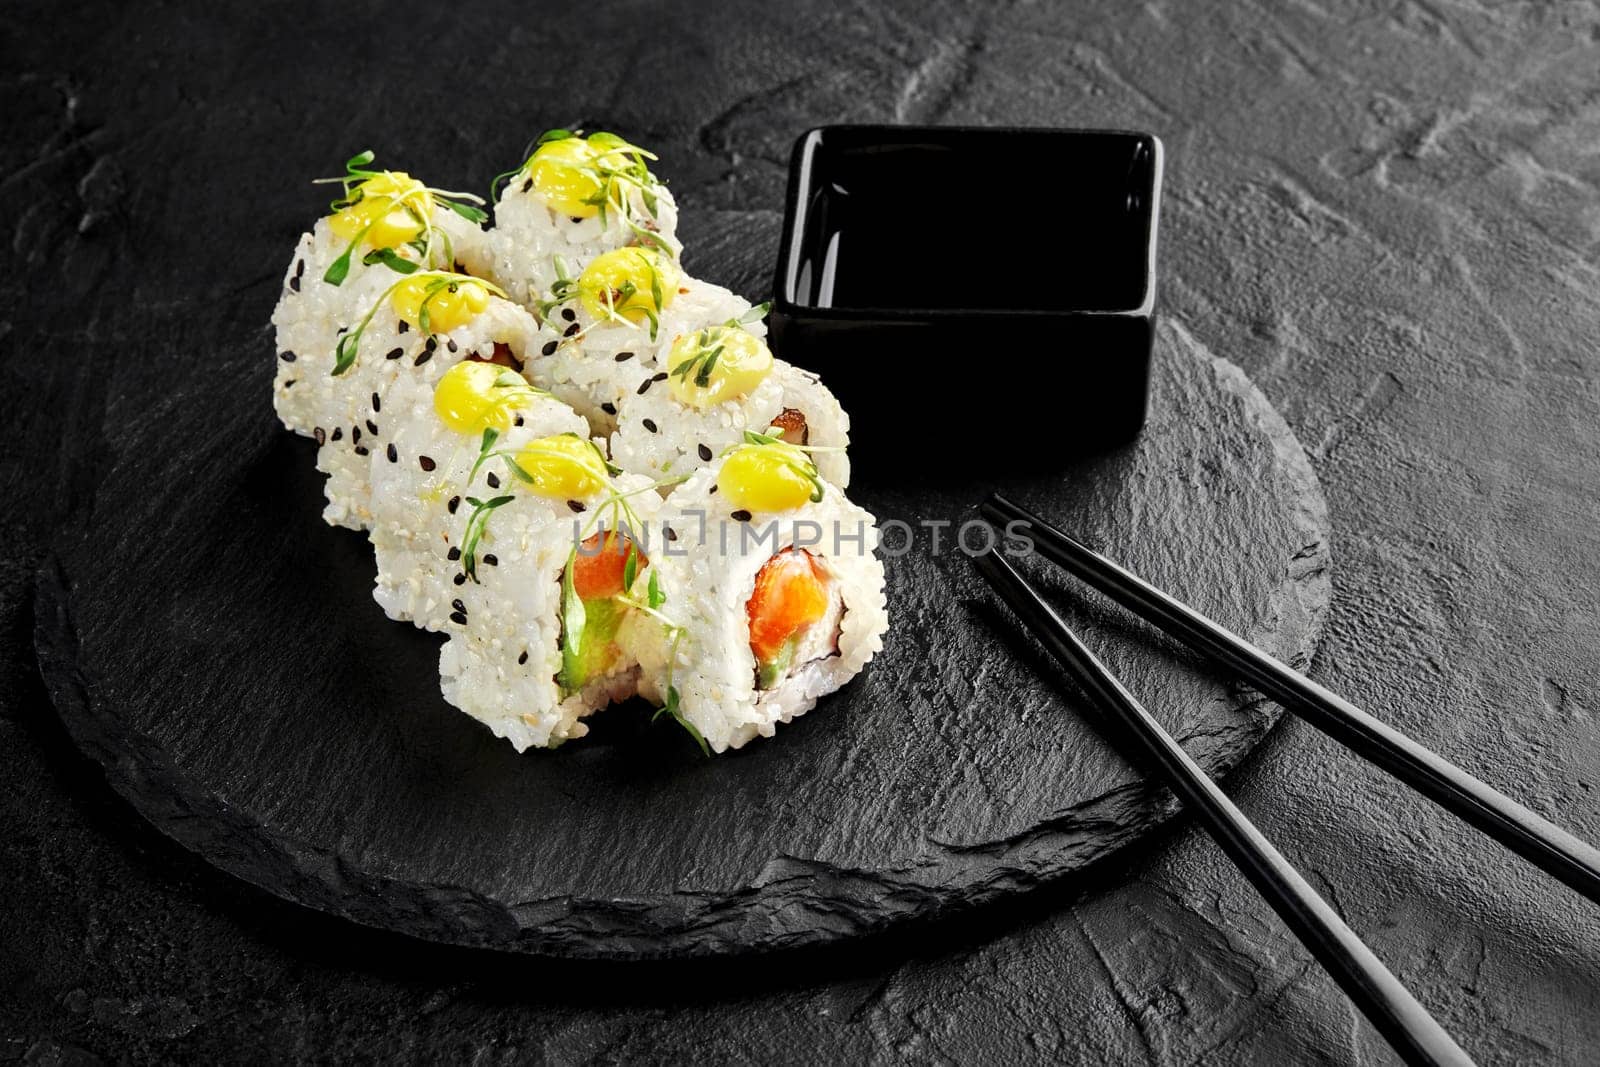 Sesame coated sushi rolls with avocado and fresh salmon topped with drop of mayo and microgreens traditionally served with soy sauce on black slate board. Japanese cuisine